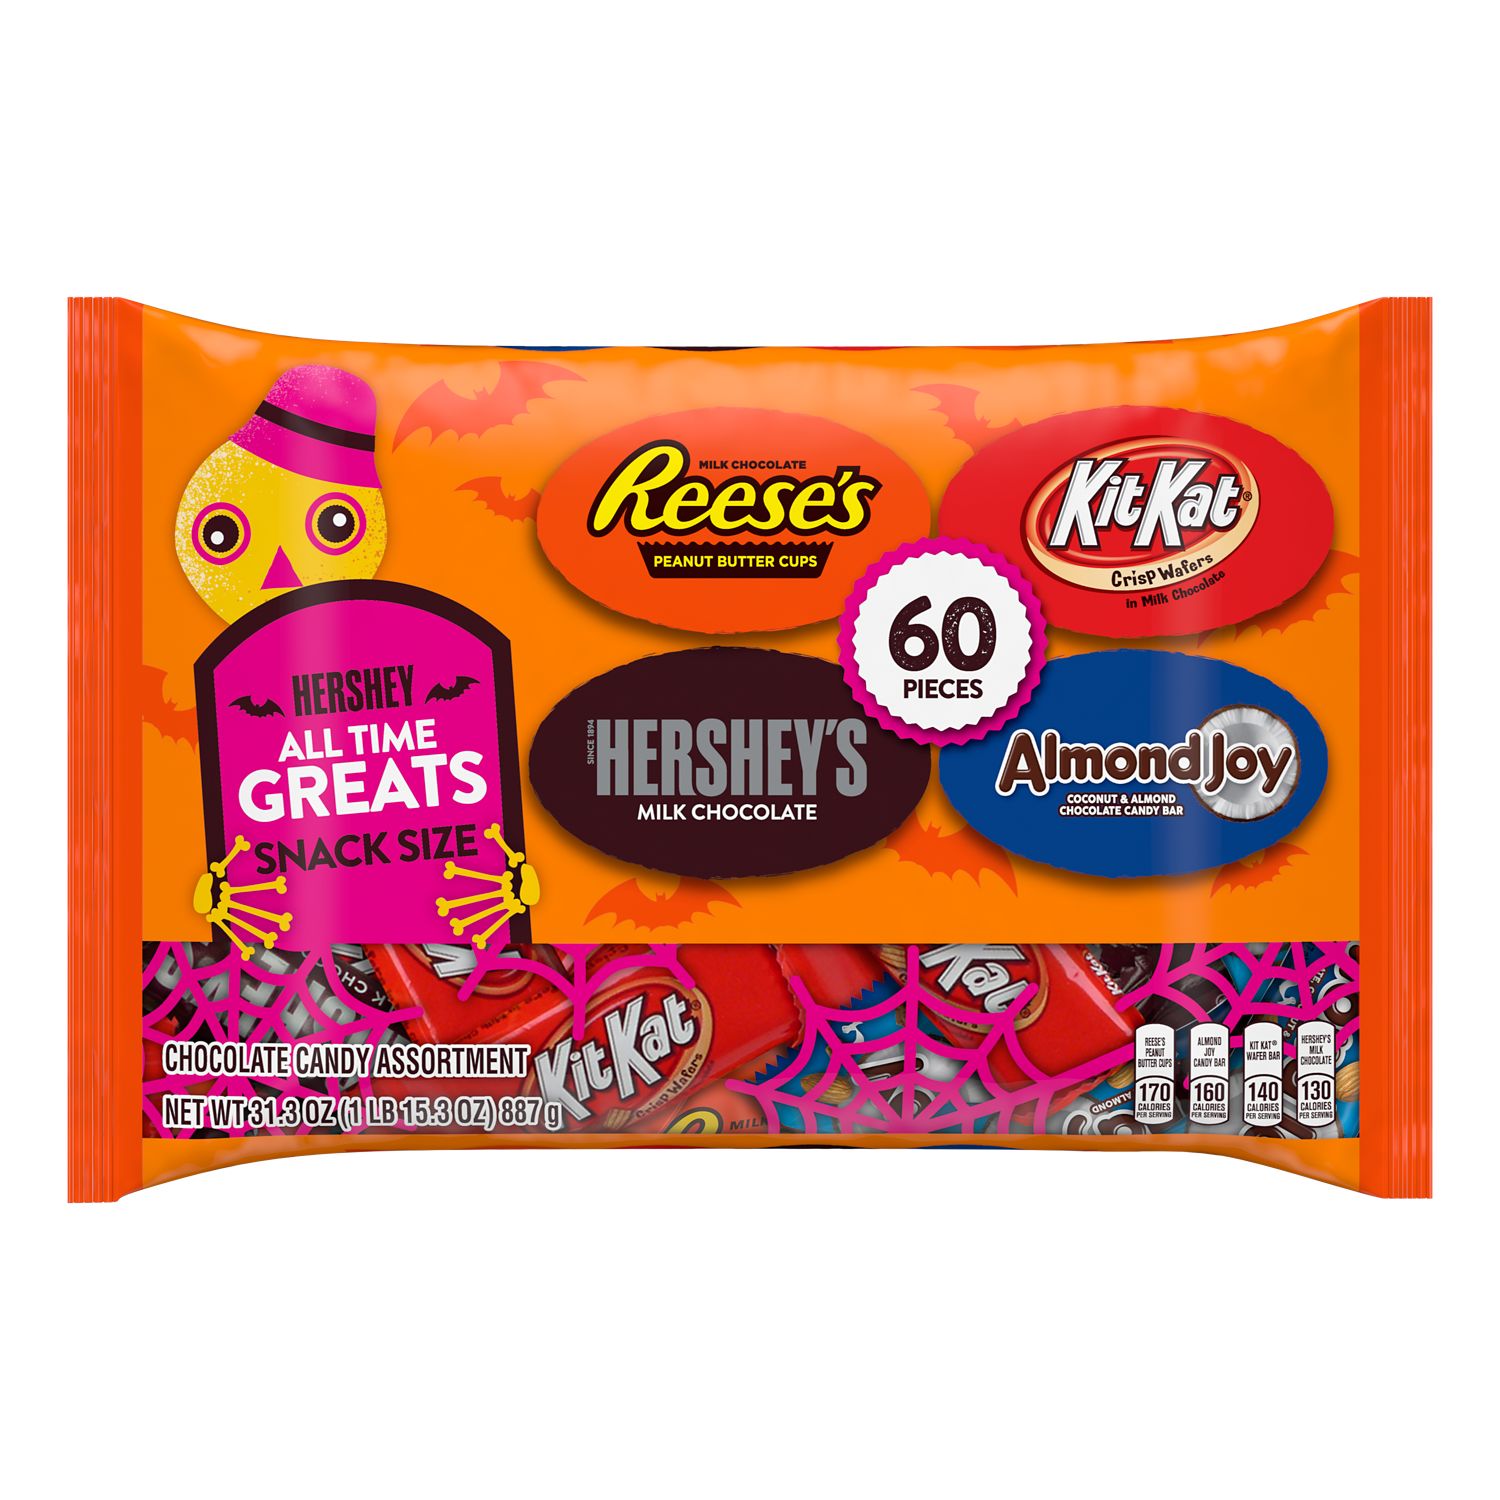 Hershey, All Time Greats Chocolate Assortment Snack Size Candy, Halloween, 31.3 oz, Bulk Bag (60 Pieces) - image 1 of 11